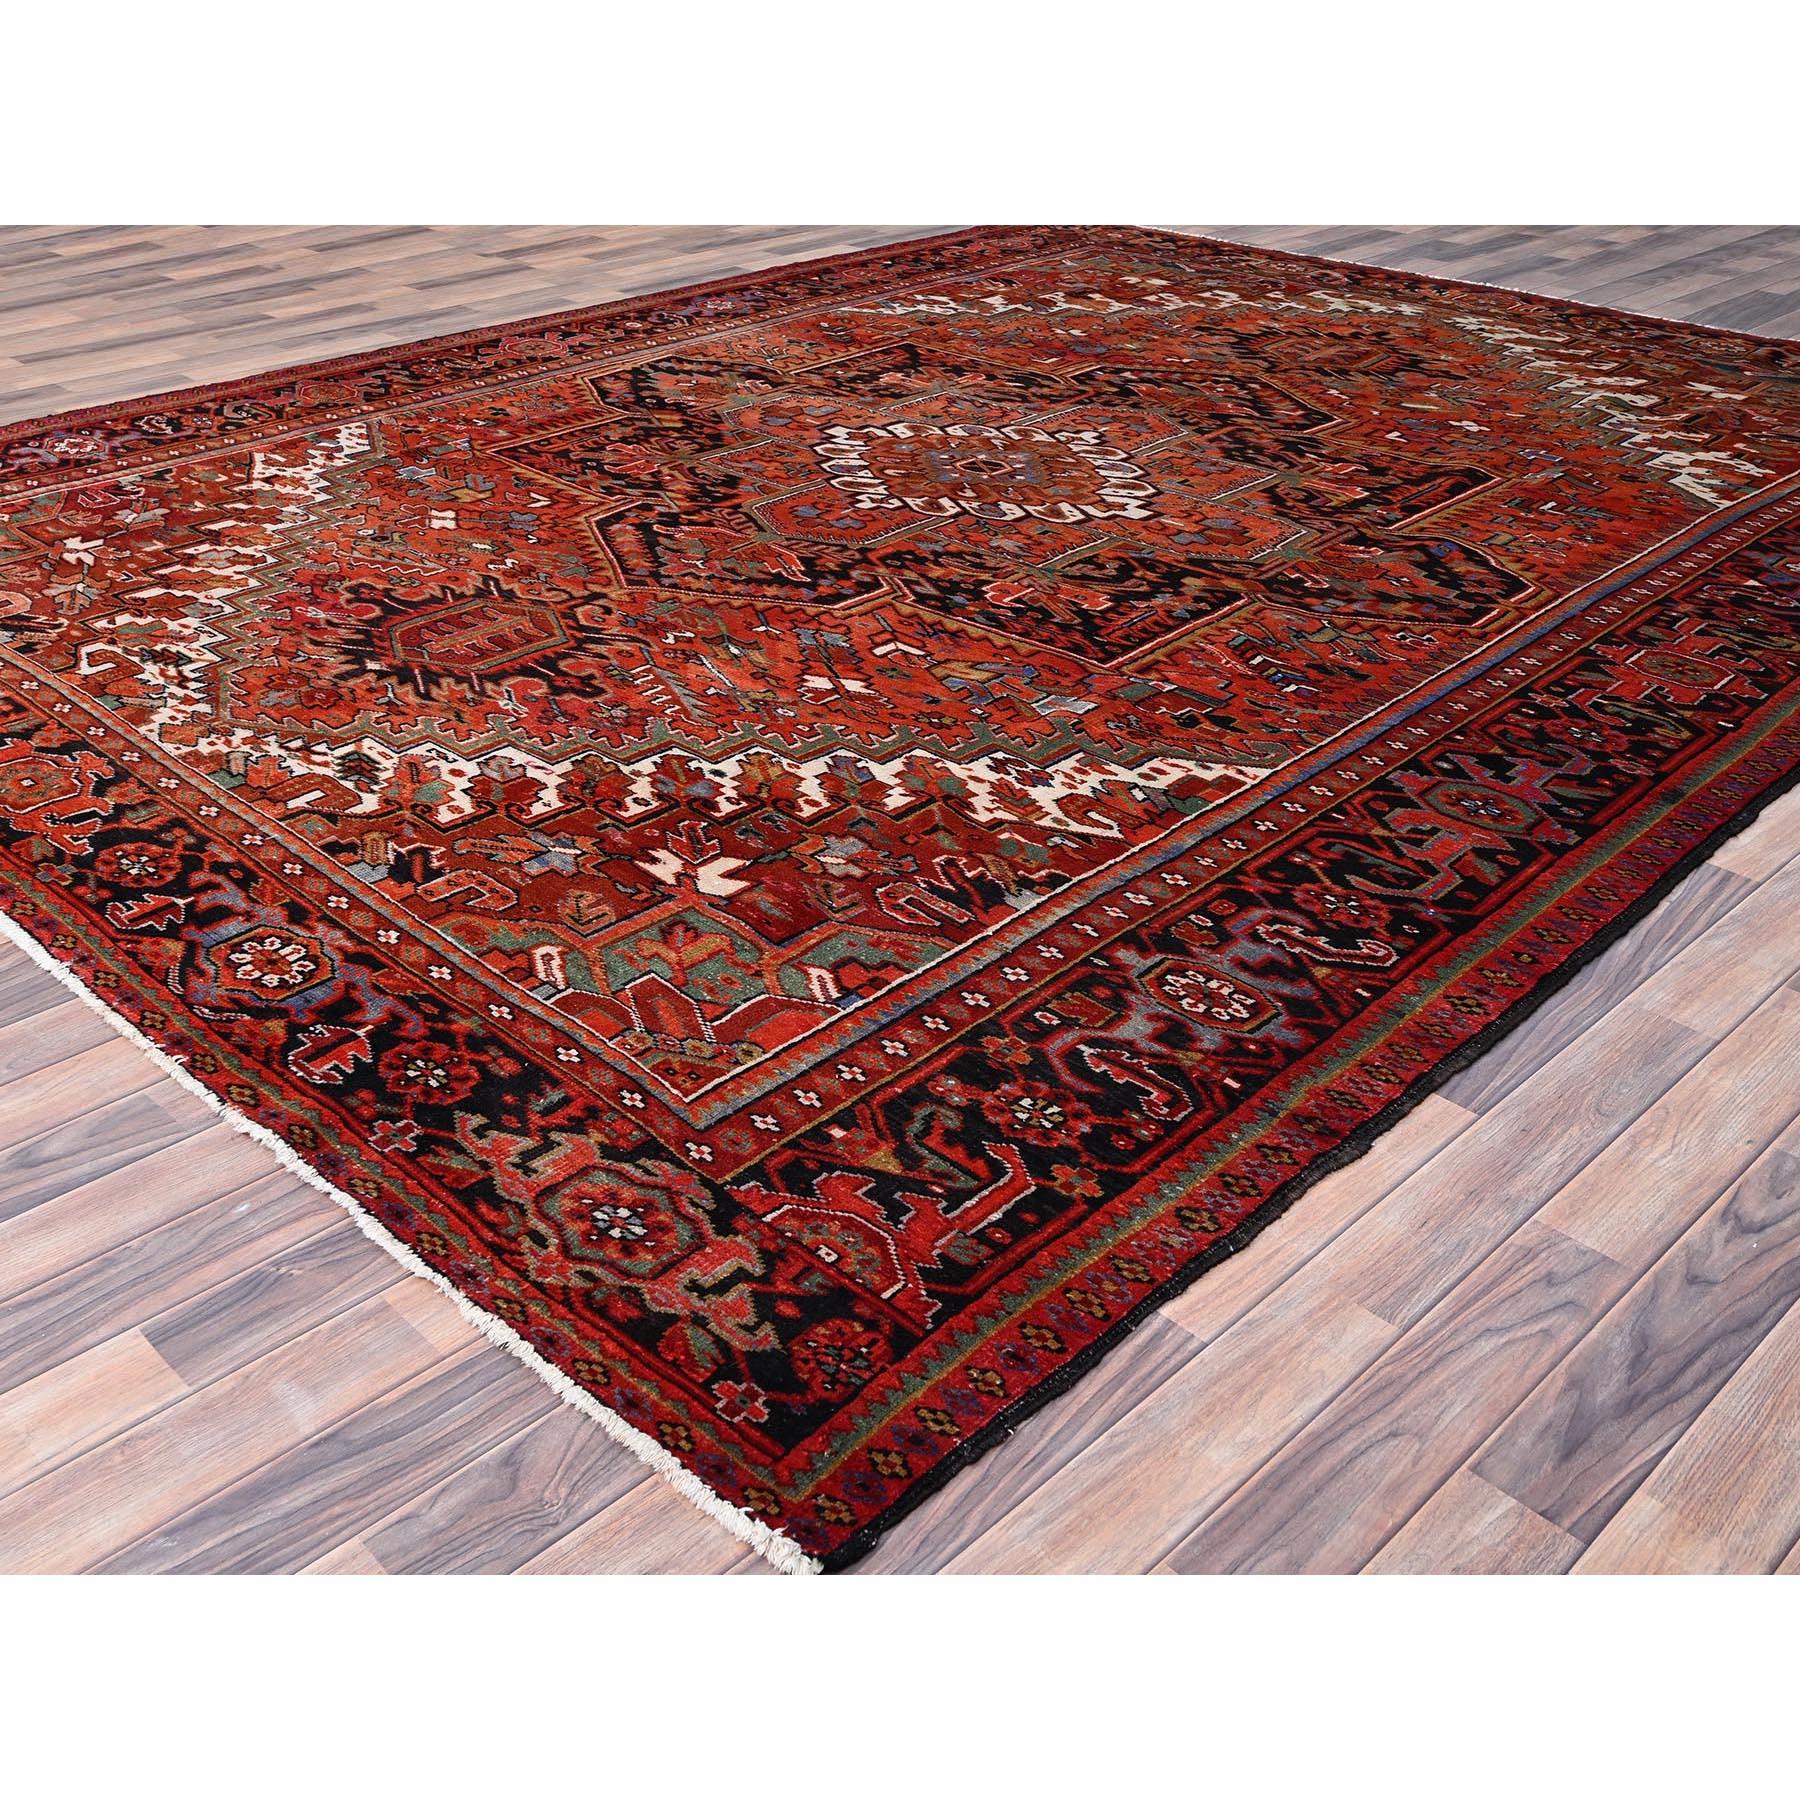 Hand-Knotted Orange Evenly Worn Pure Wool Hand Knotted Vintage Abrash Persian Heriz Clean Rug